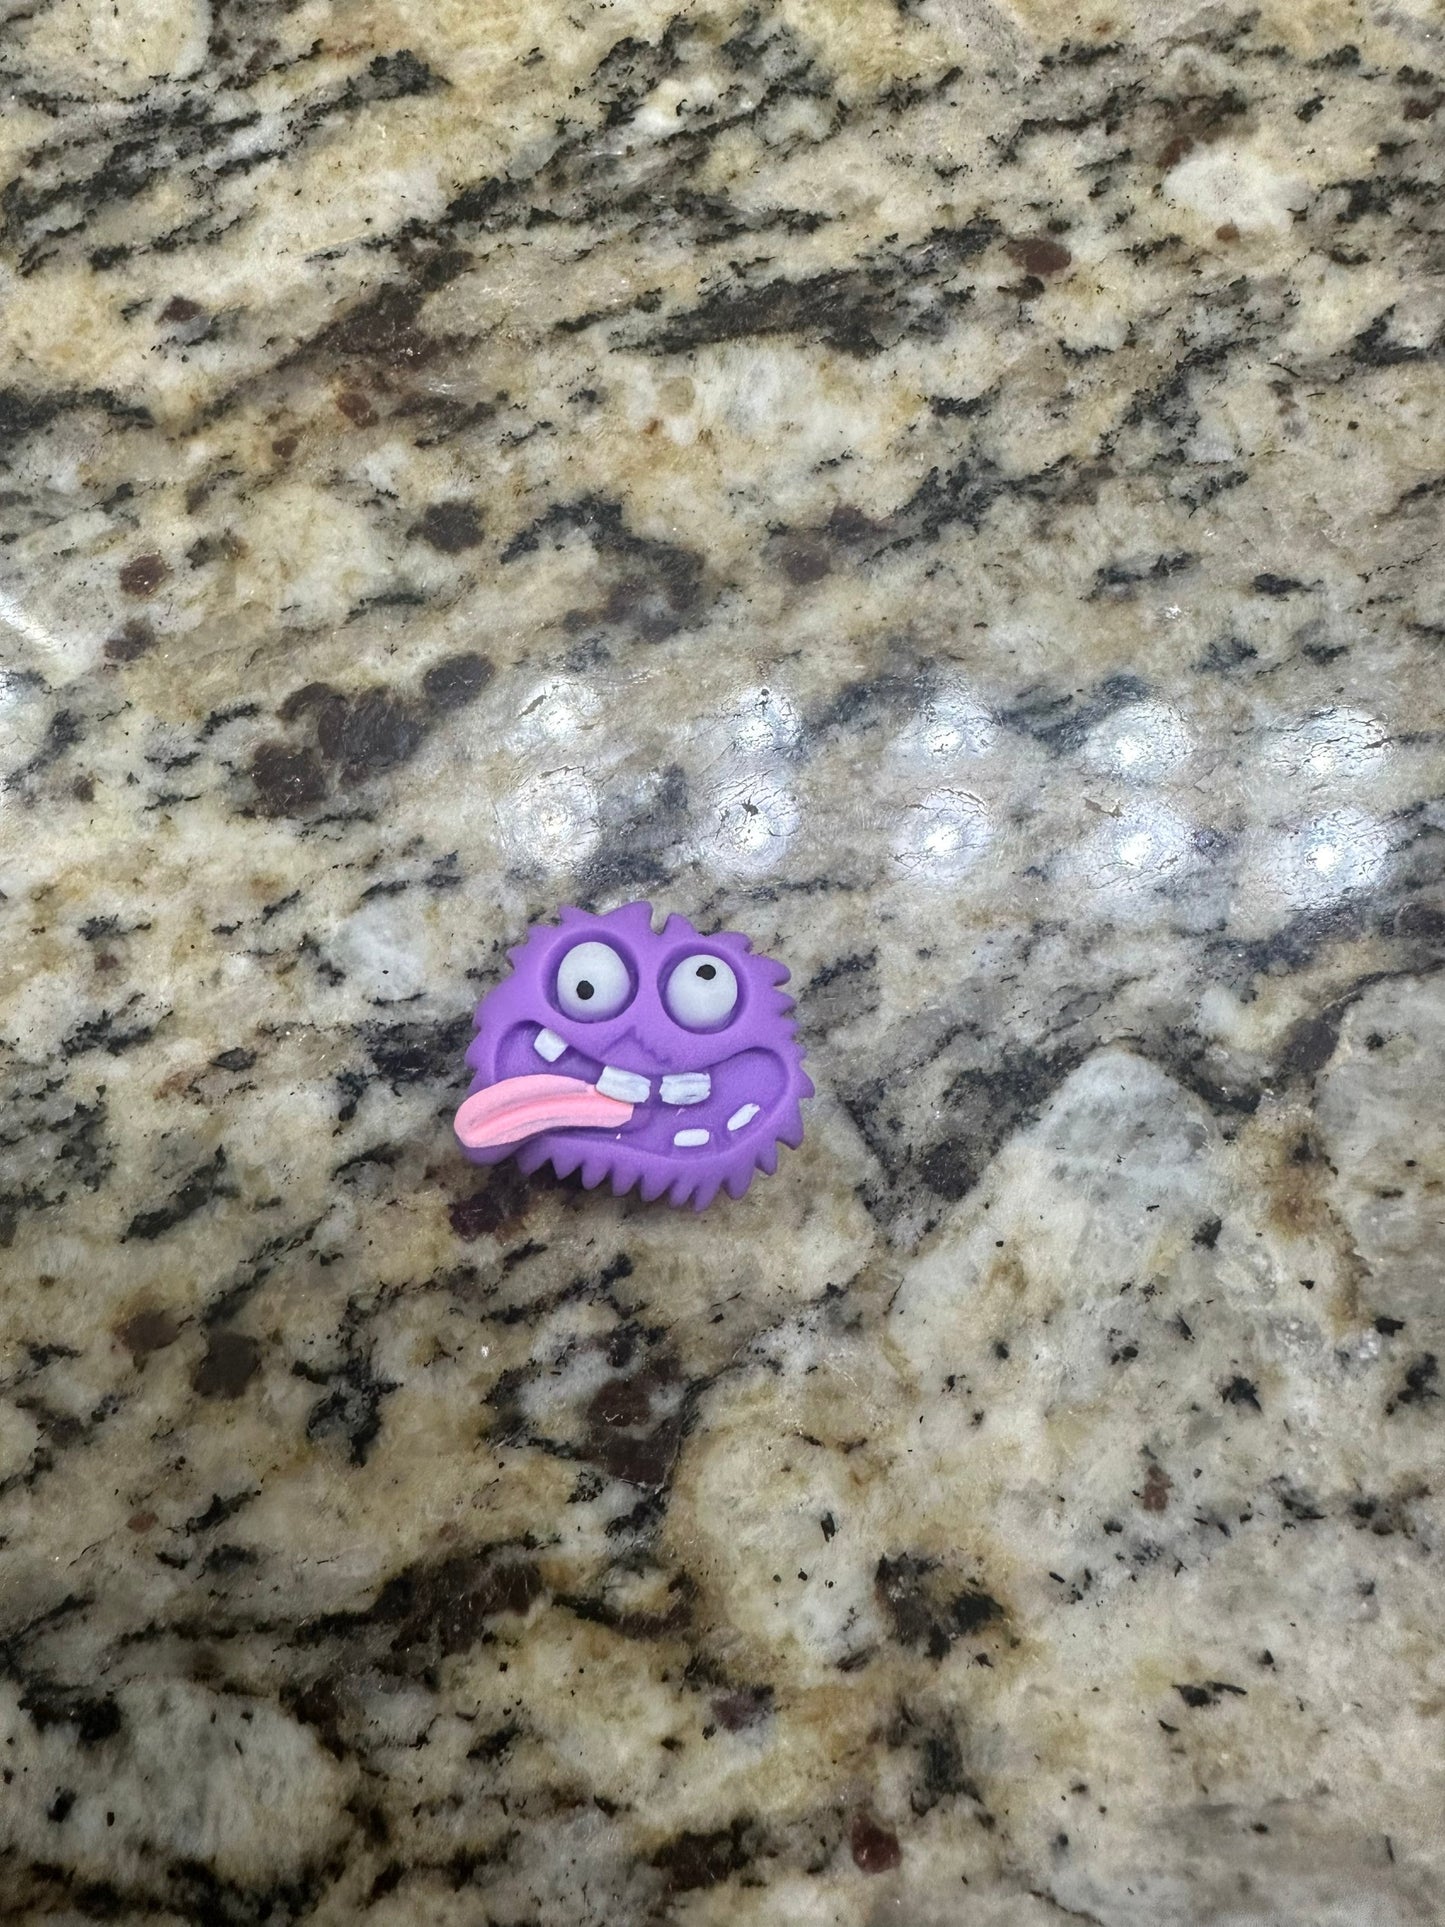 Silly monsters| funny monsters| shoe charms| gifts for kids| boys shoe charms| Monster charms| kids shoe charms| Happy monsters|